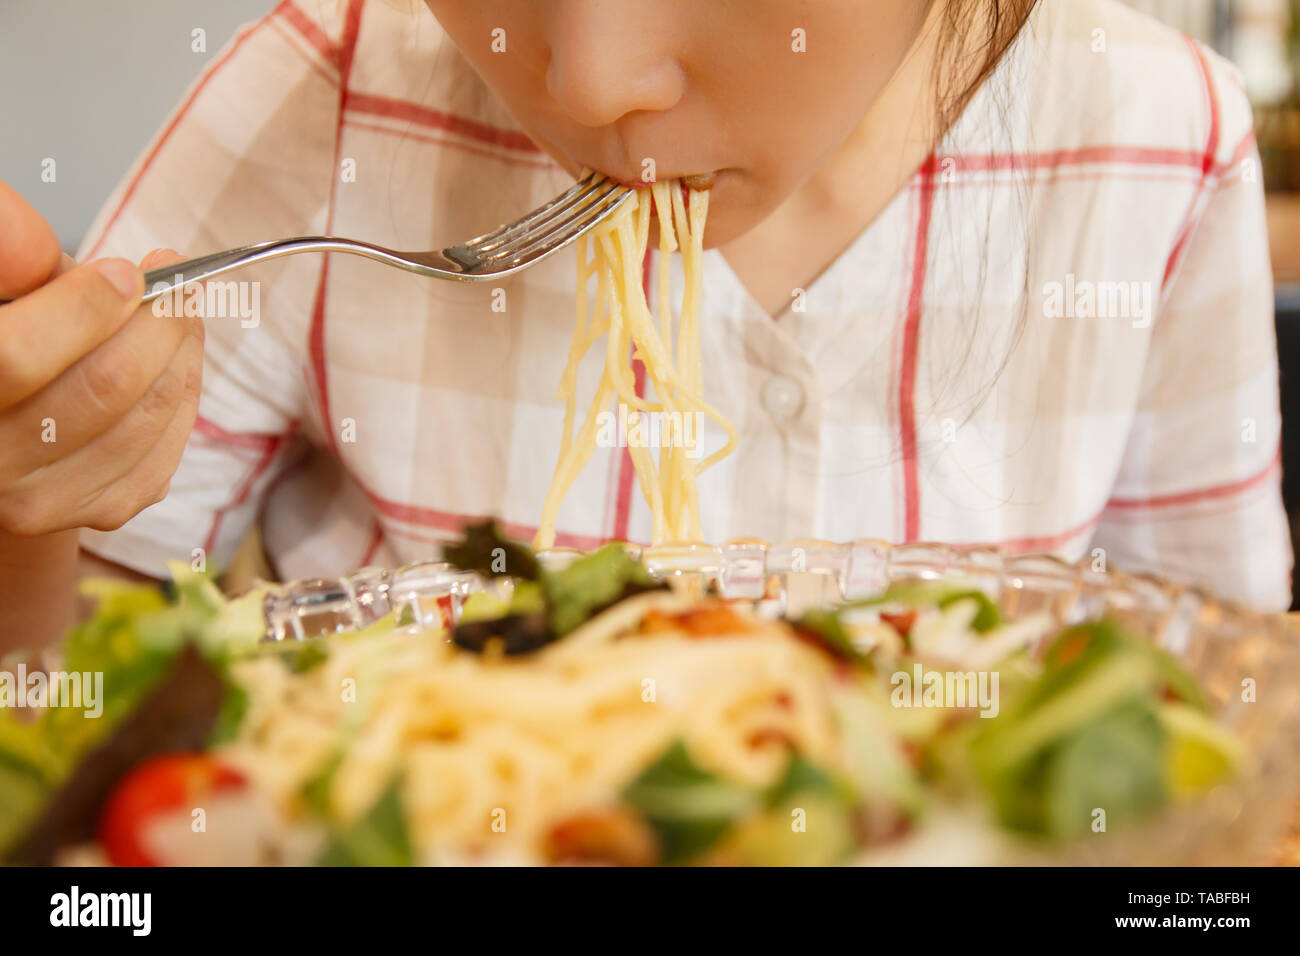 Asian woman eating spaghetti with a fork Stock Photo